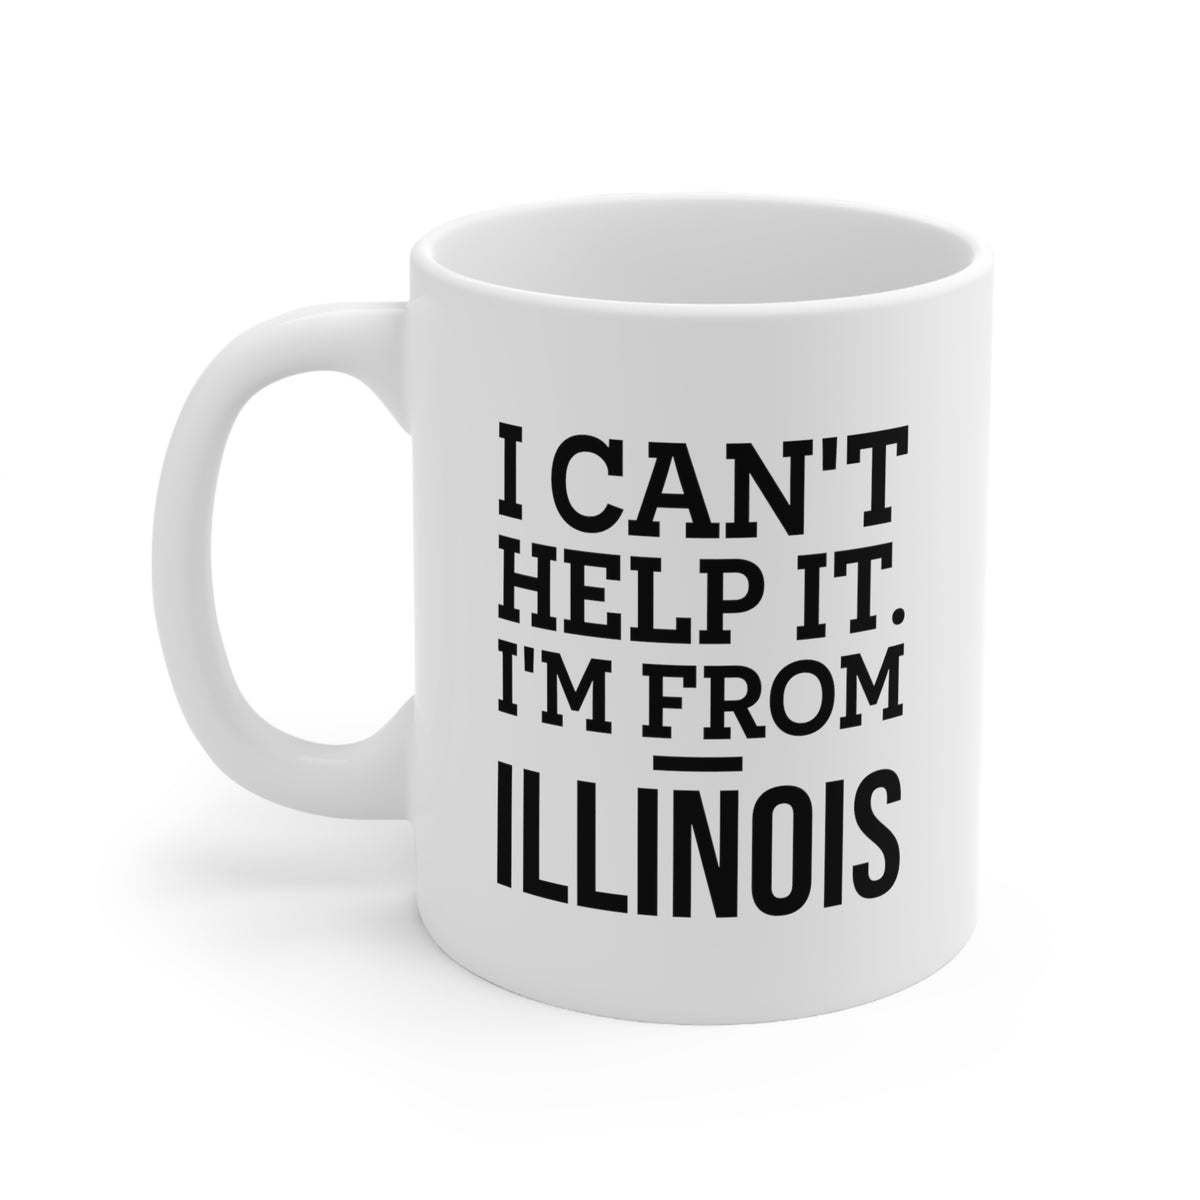 Illinois State 11oz Coffee Mug - I can't help it. I'm from - Unique Funny Gift For Men and Women